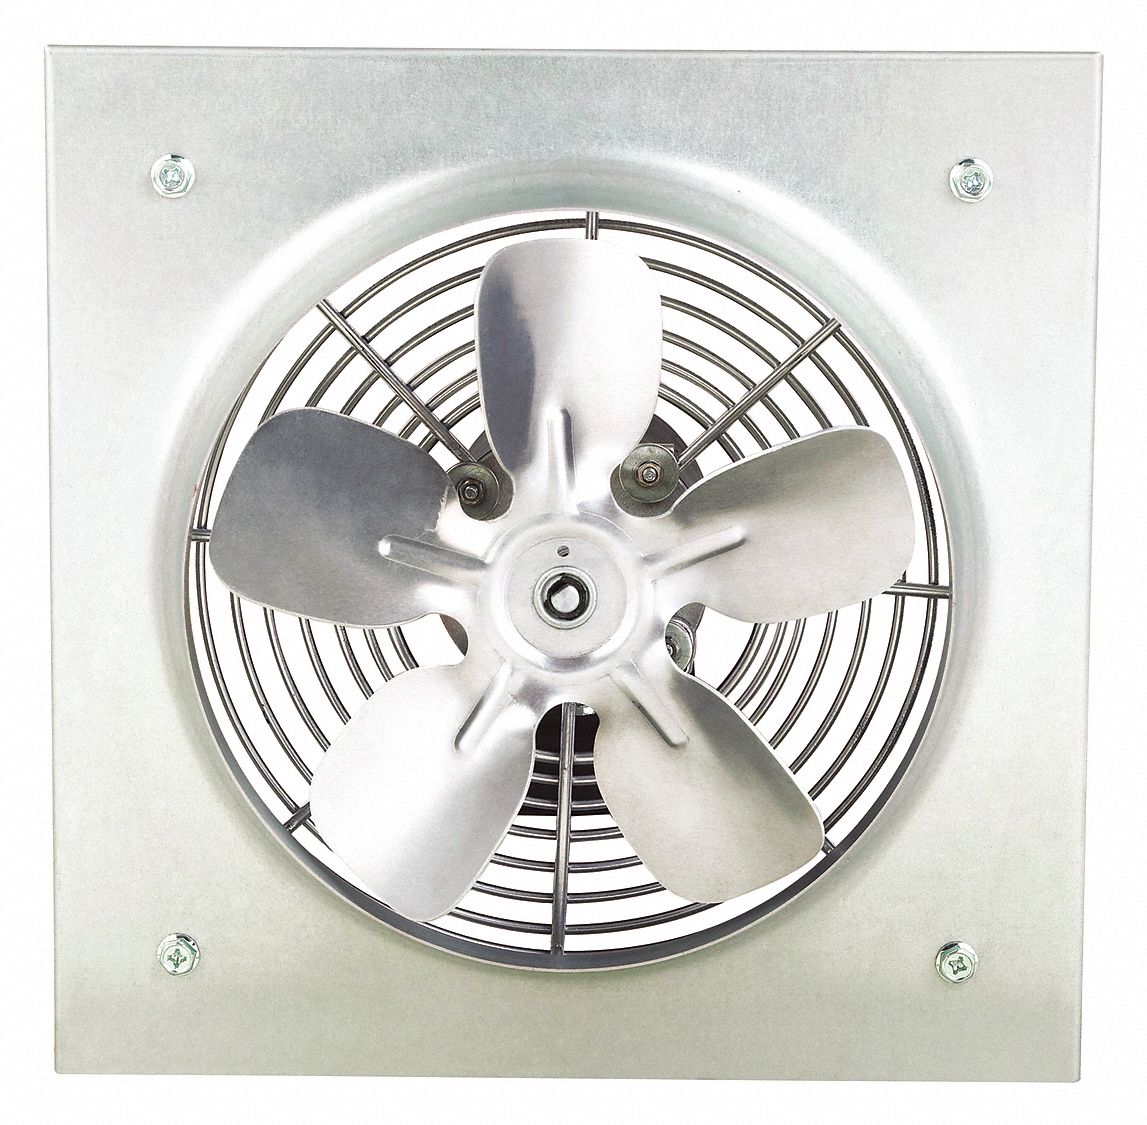 12 in" x 12 in" 115V ACV Medium Duty Direct Drive Exhaust Fan with 8 in Blade Dia.